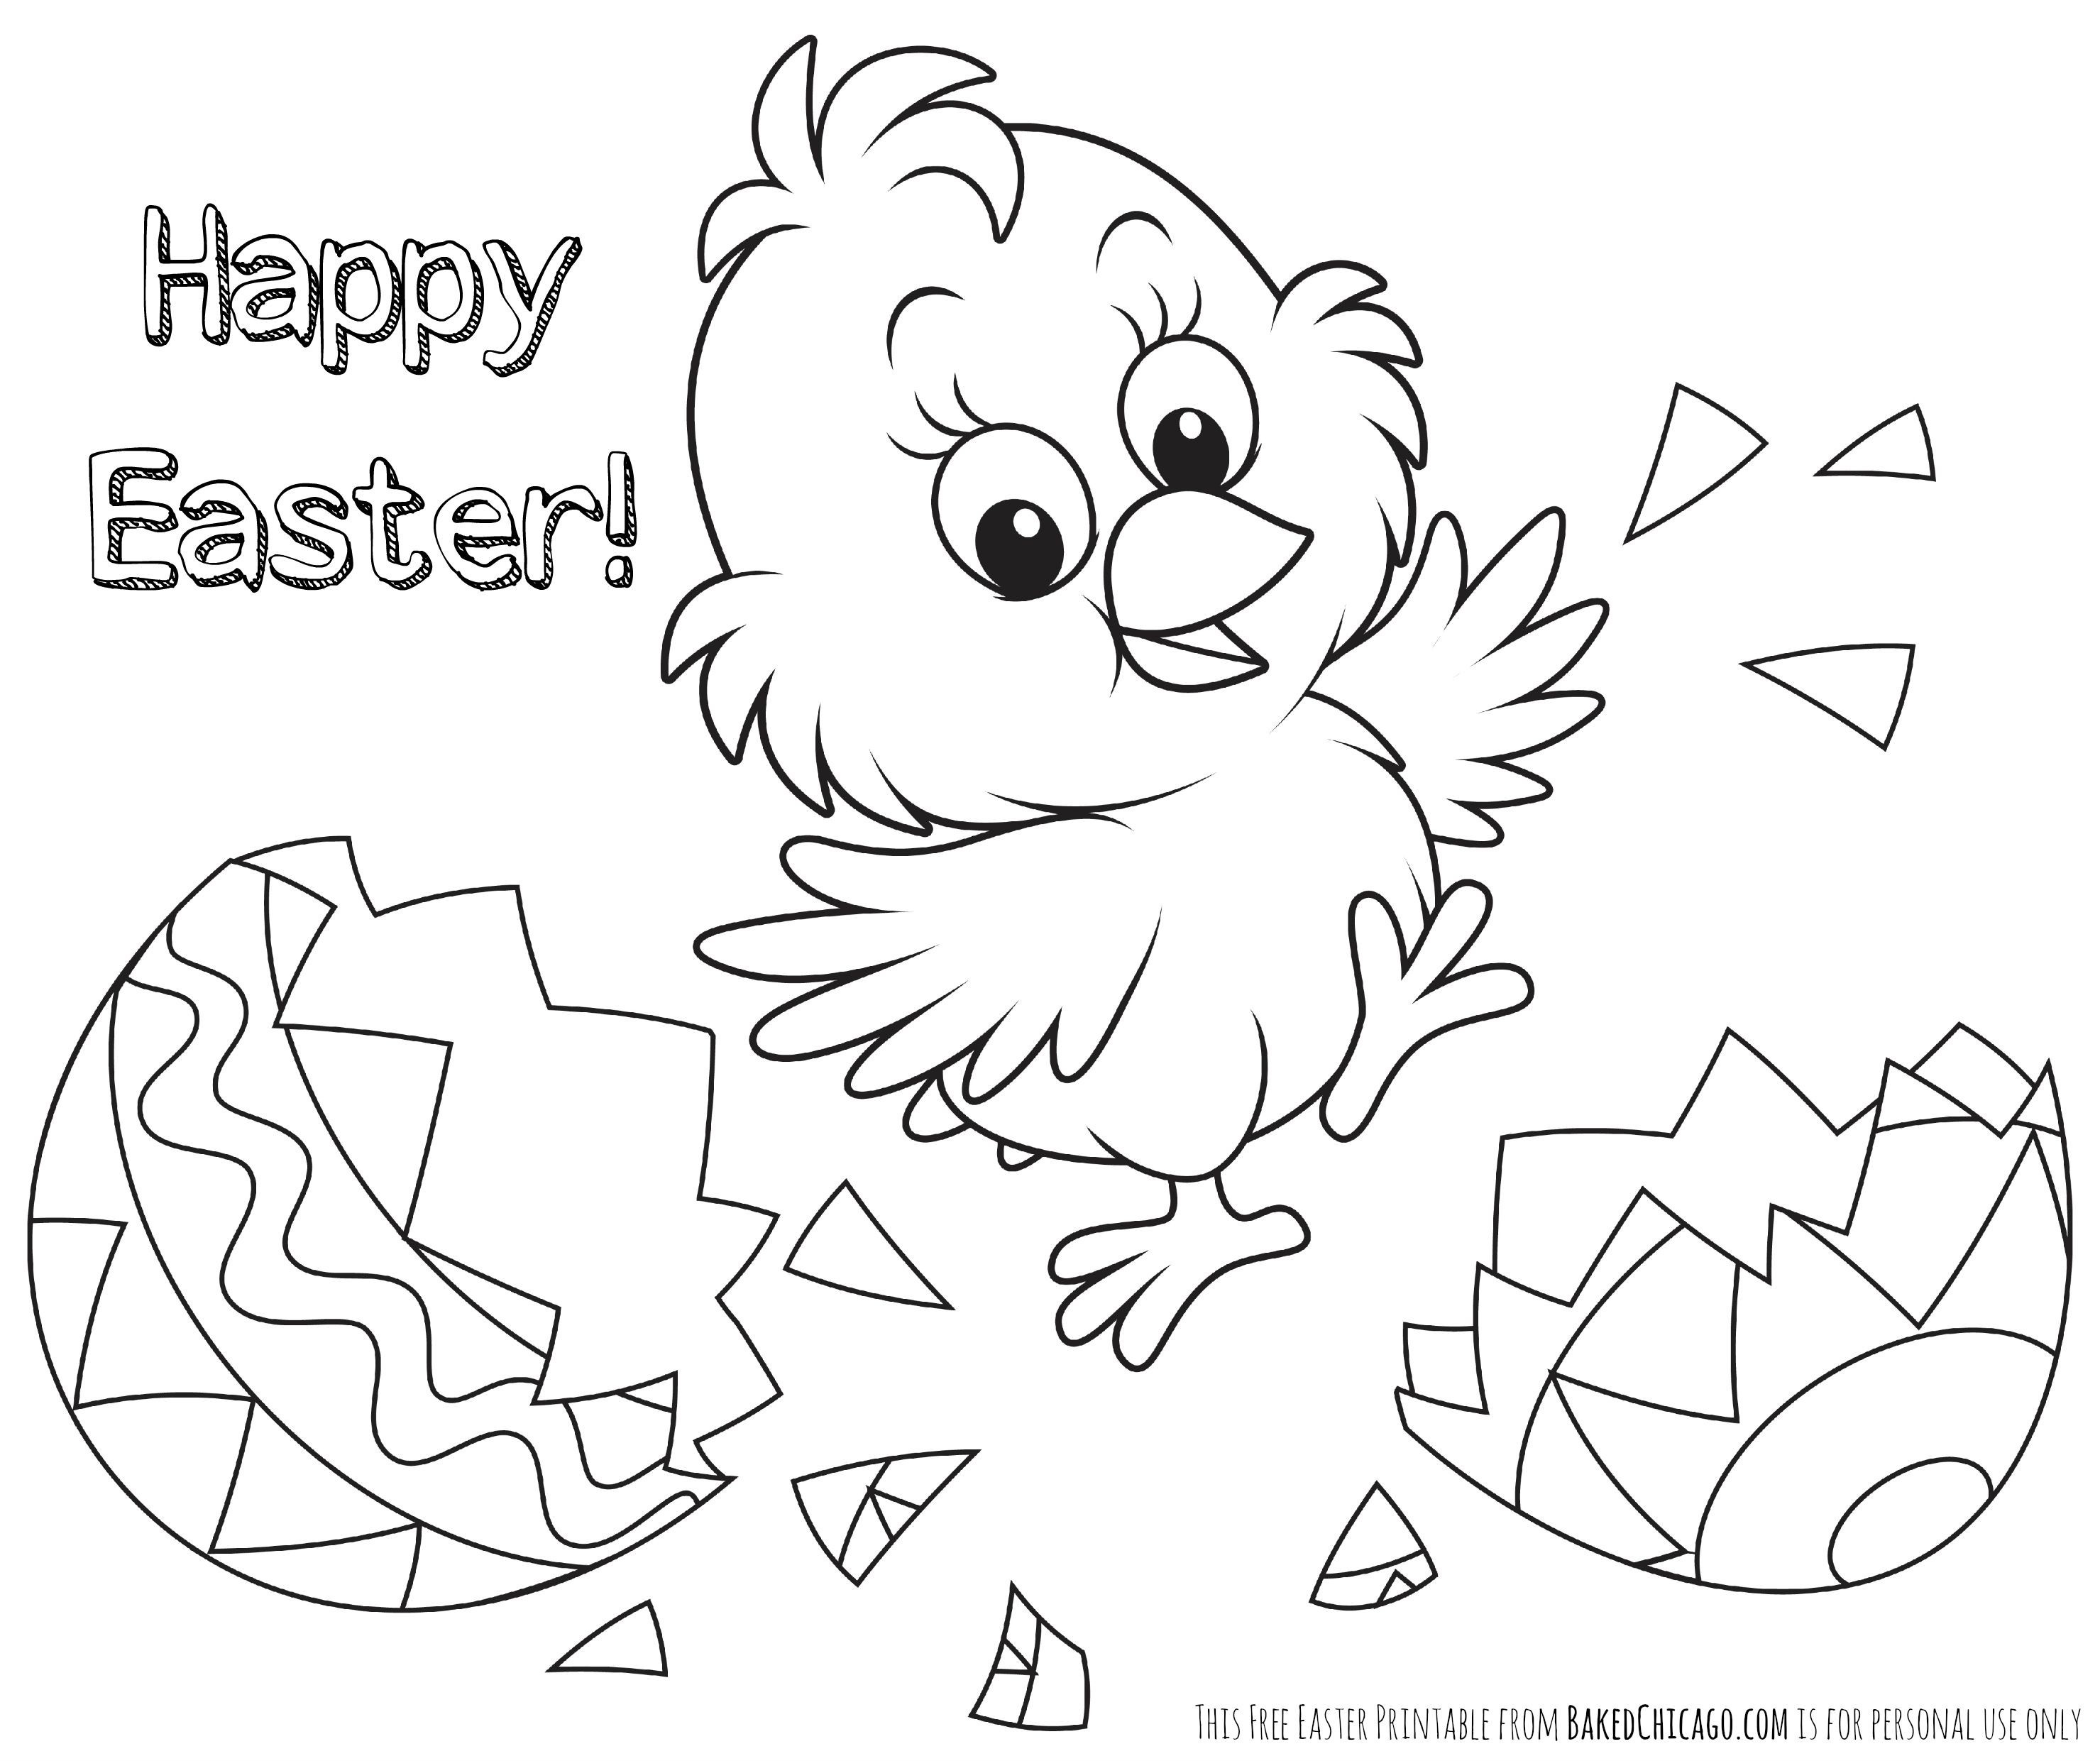 12 Free Printable Easter Coloring Pages | Topsailmultimedia - Free Printable Easter Coloring Pictures